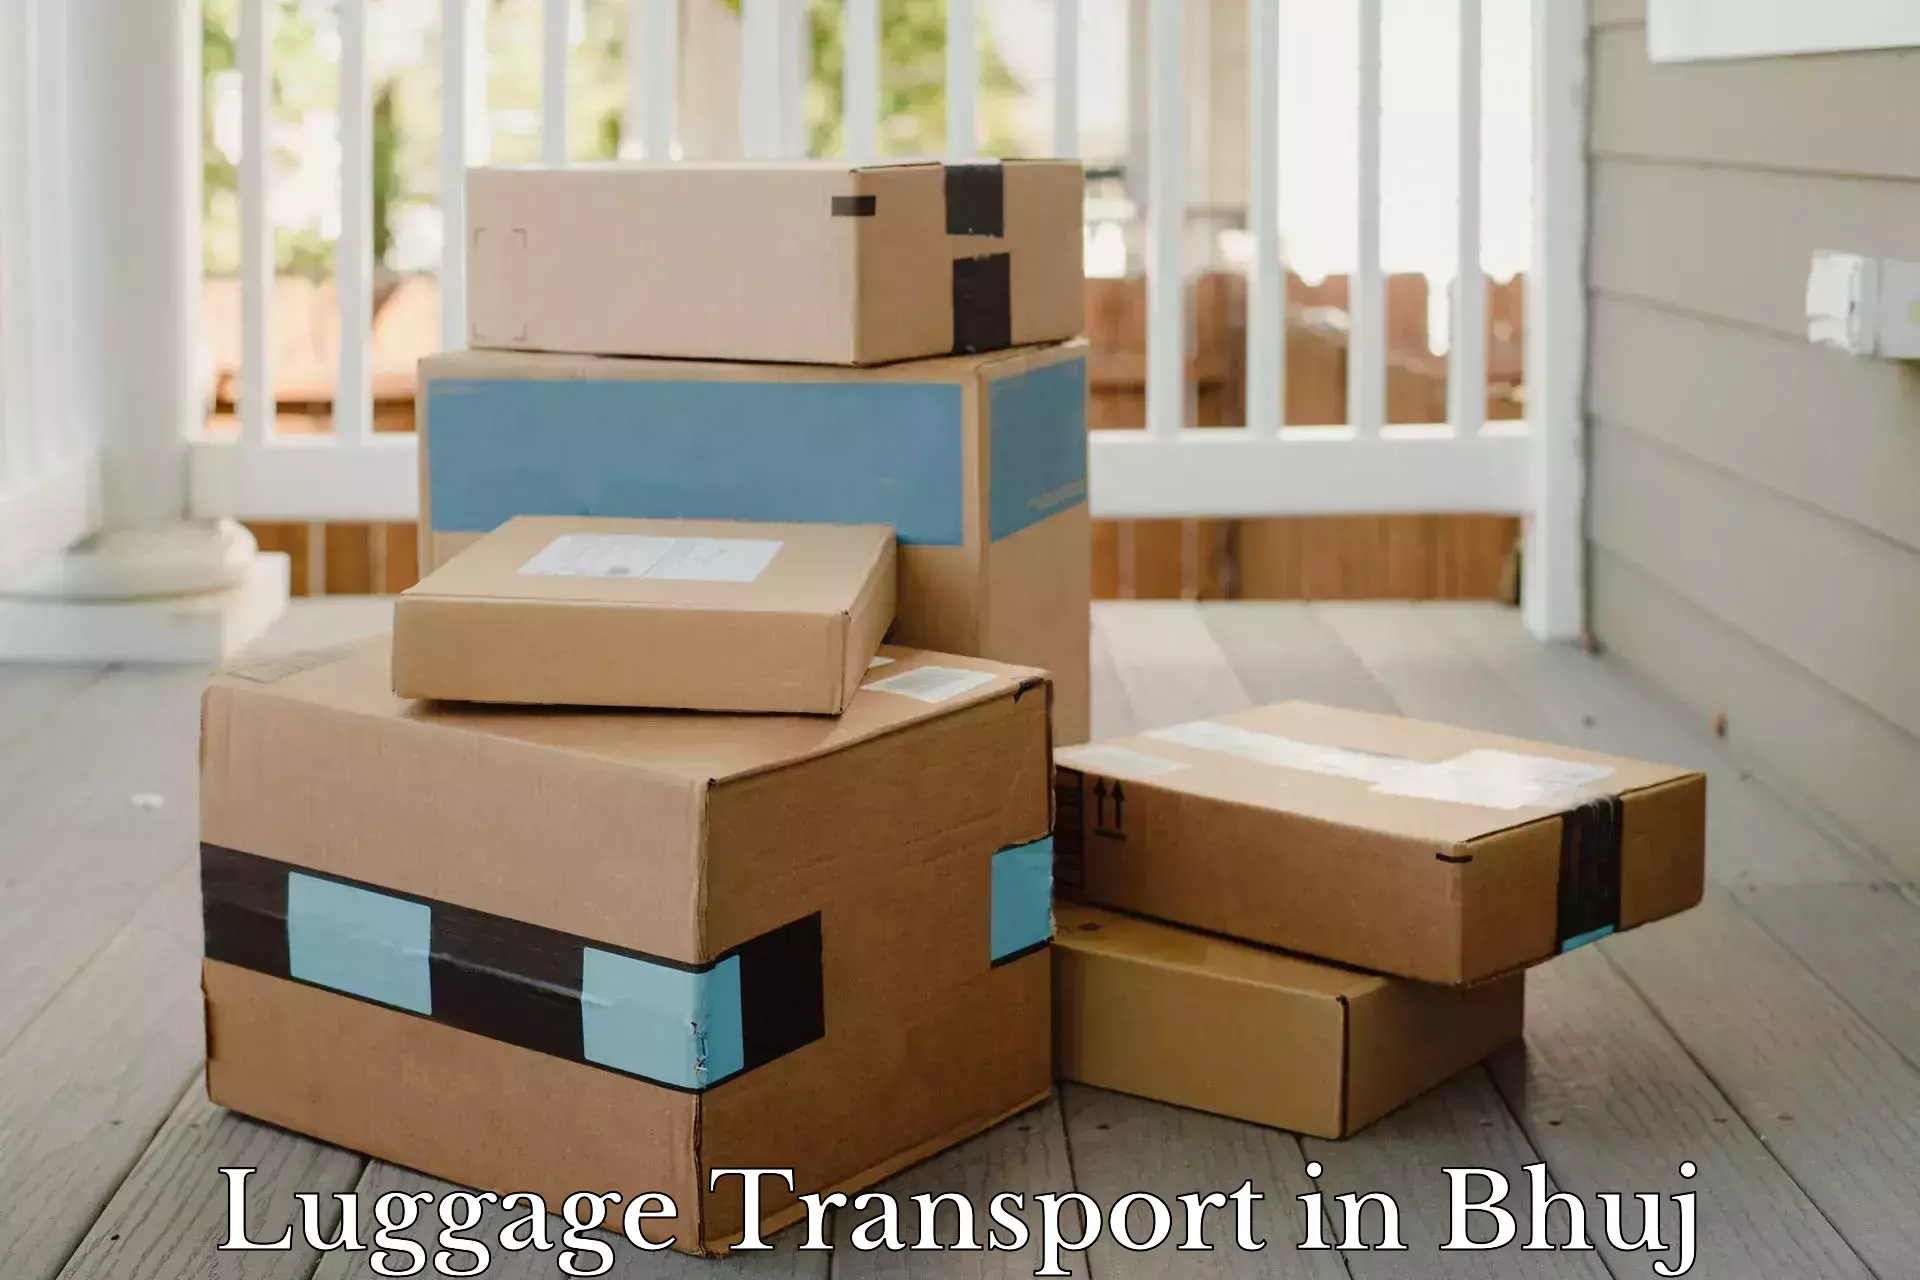 Luggage transport deals in Bhuj